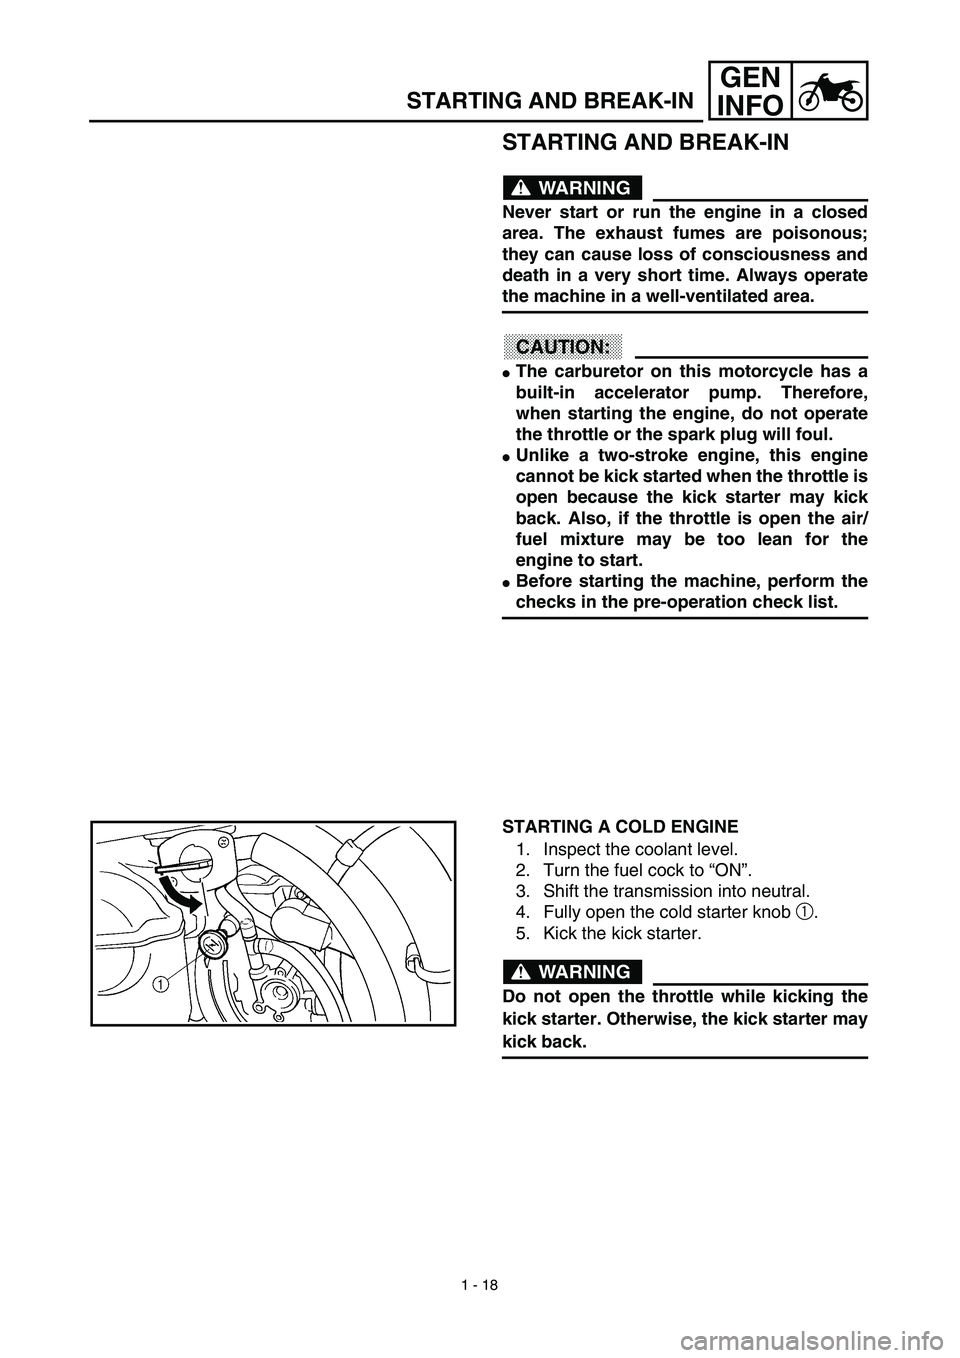 YAMAHA YZ450F 2003  Owners Manual 1 - 18
GEN
INFO
STARTING AND BREAK-IN
STARTING AND BREAK-IN
WARNING
Never start or run the engine in a closed
area. The exhaust fumes are poisonous;
they can cause loss of consciousness and
death in a